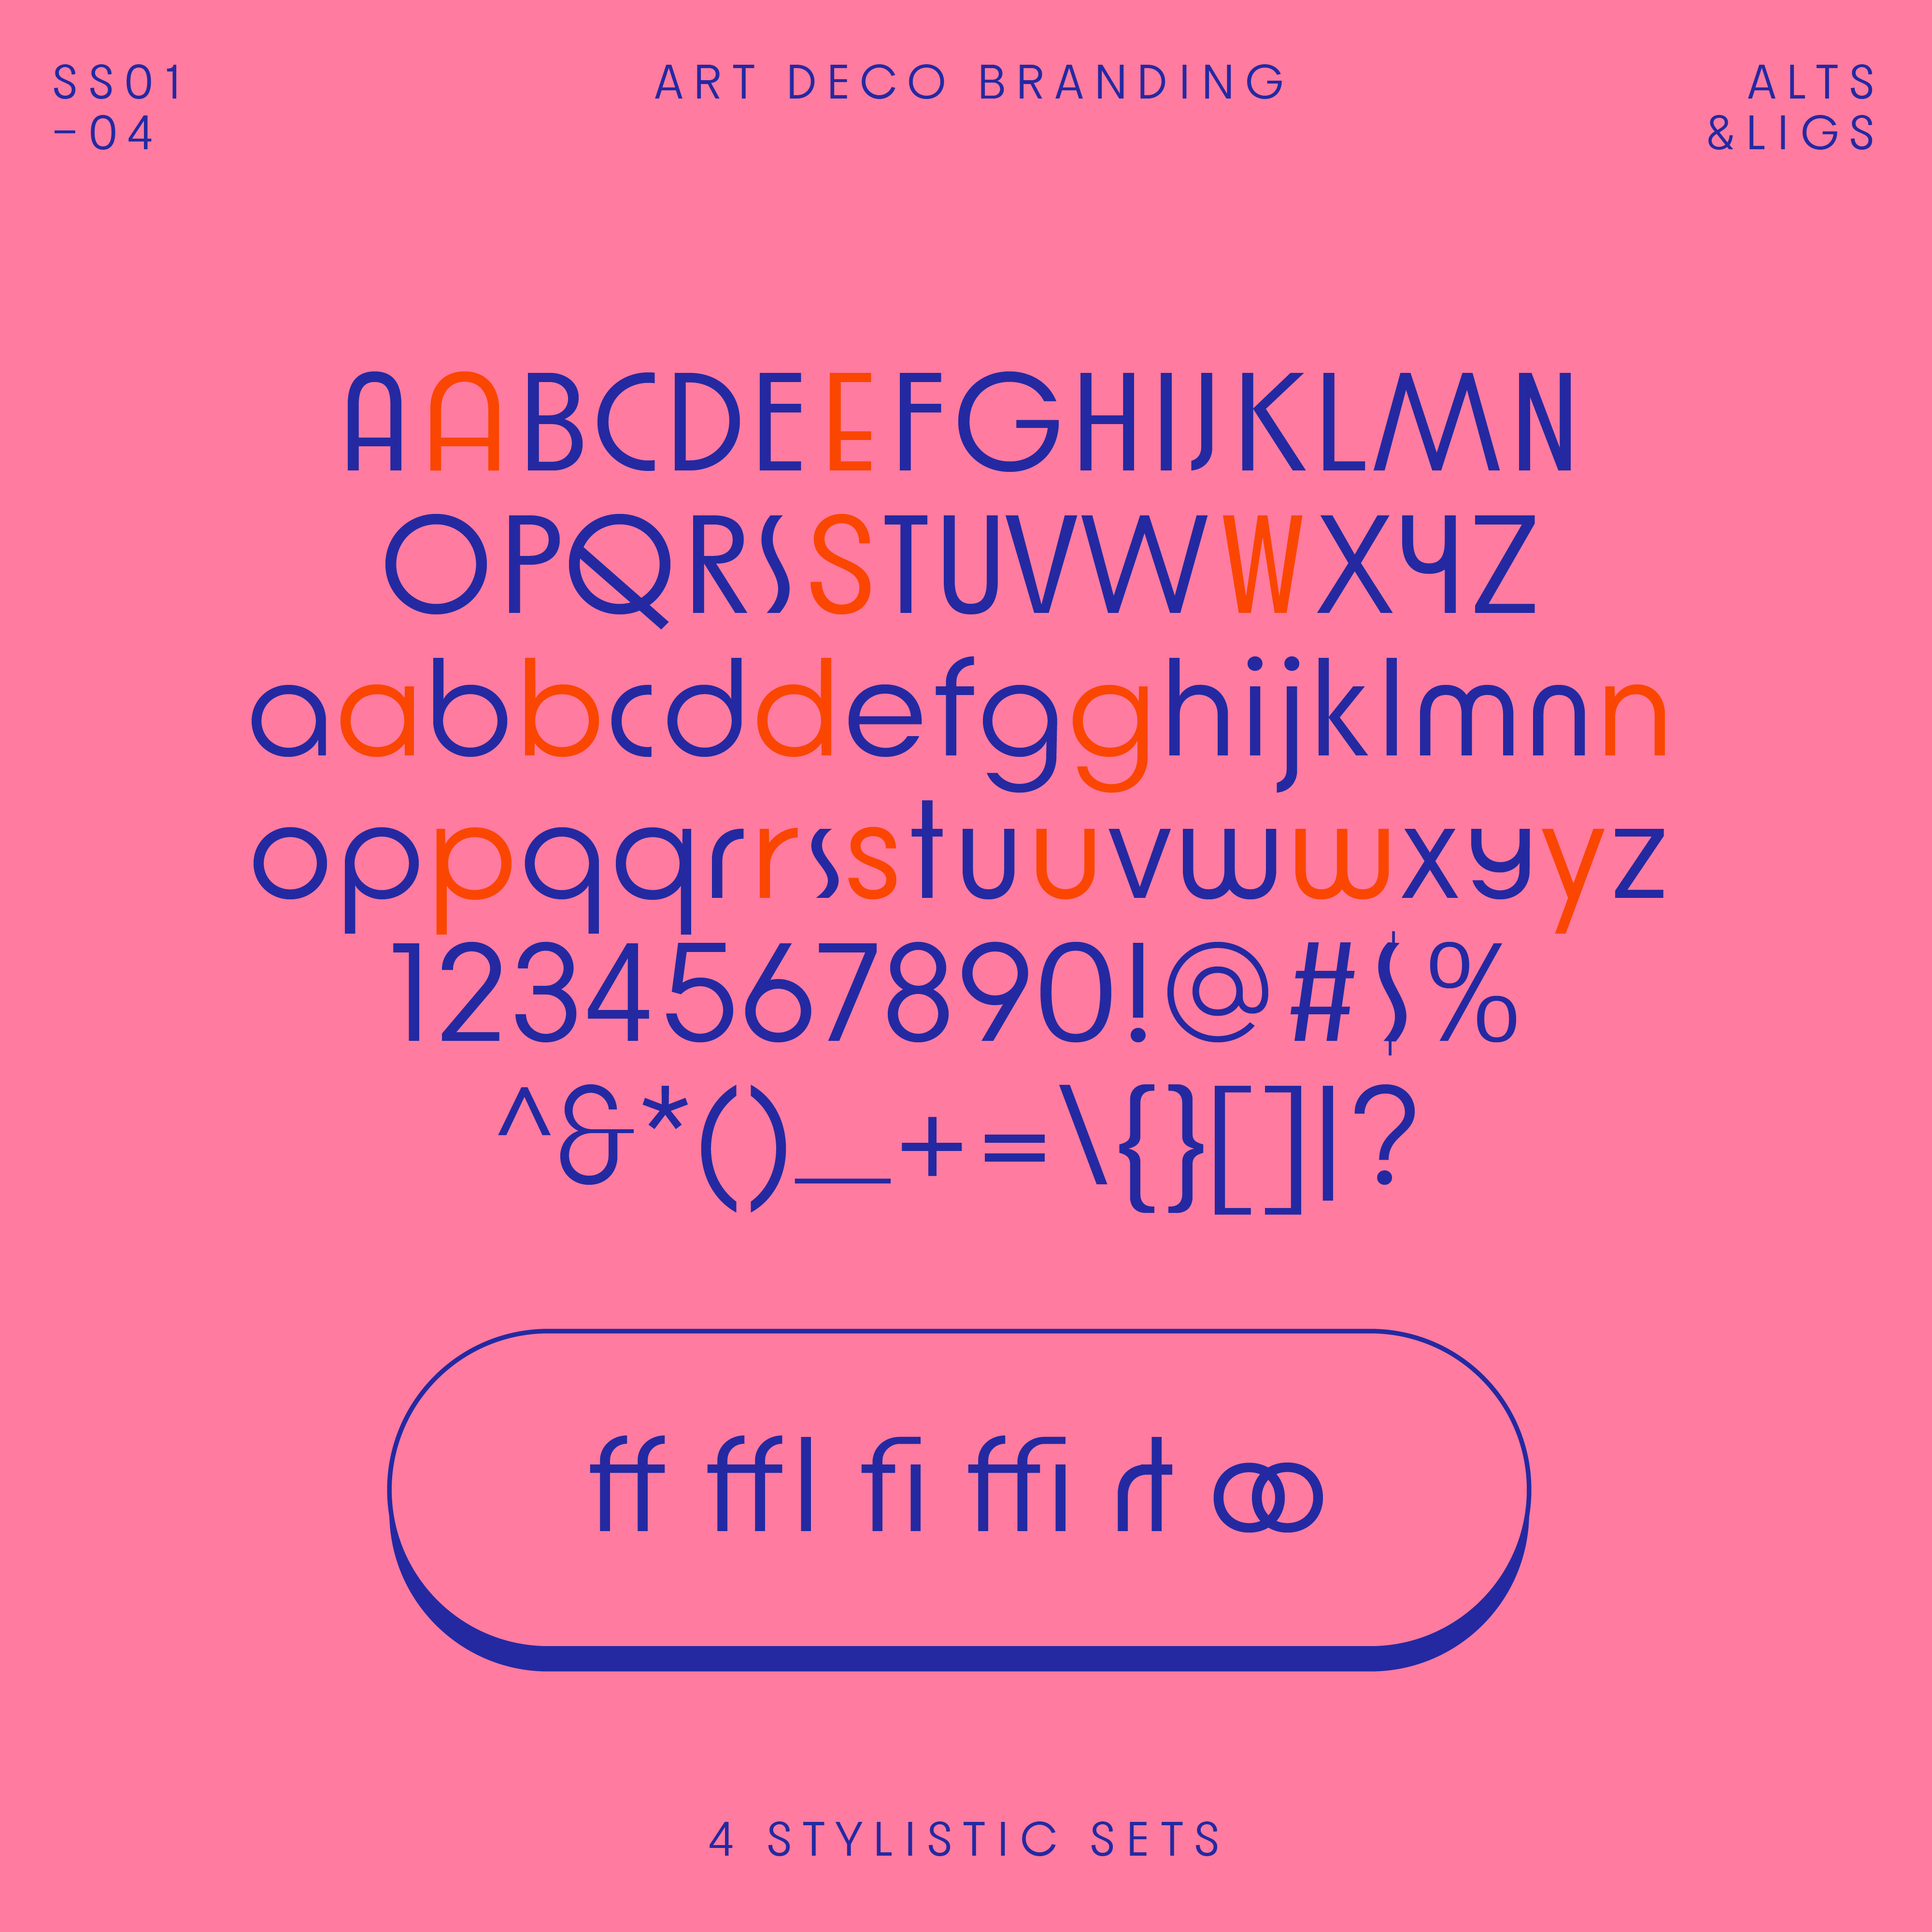 Quin—’20s font in Art Deco style